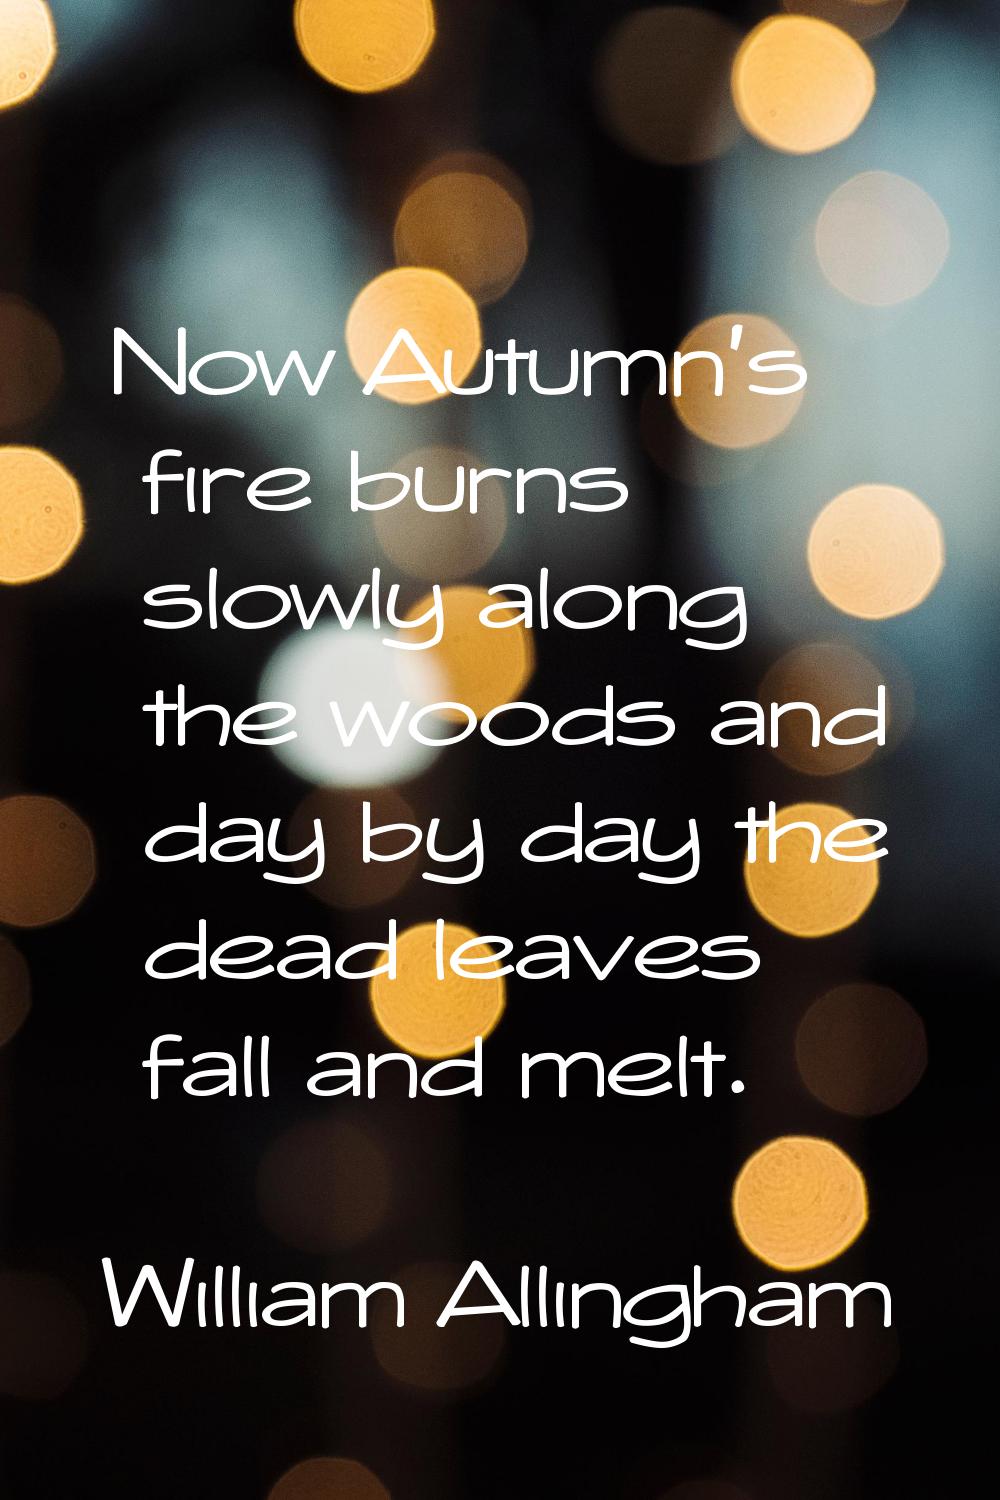 Now Autumn's fire burns slowly along the woods and day by day the dead leaves fall and melt.